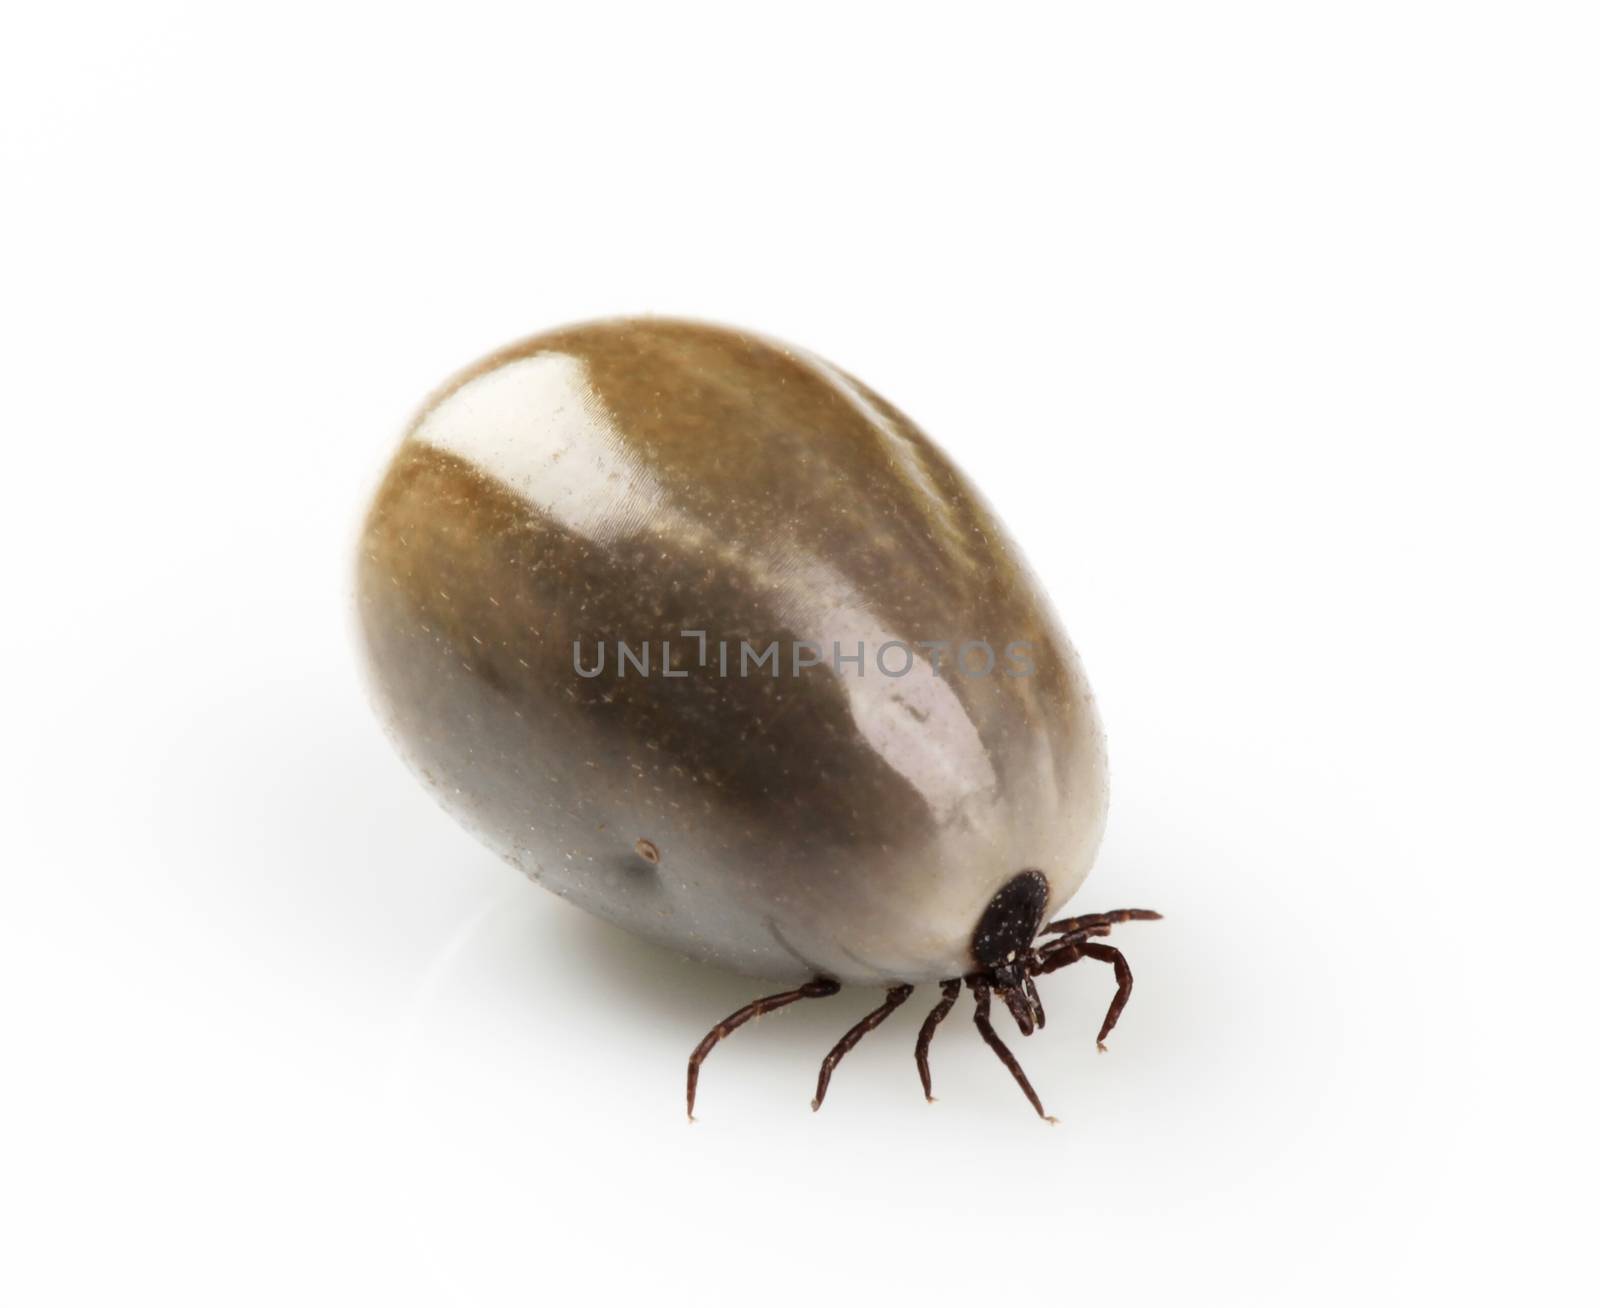 Fully fed blood-sucking tick by Digifoodstock